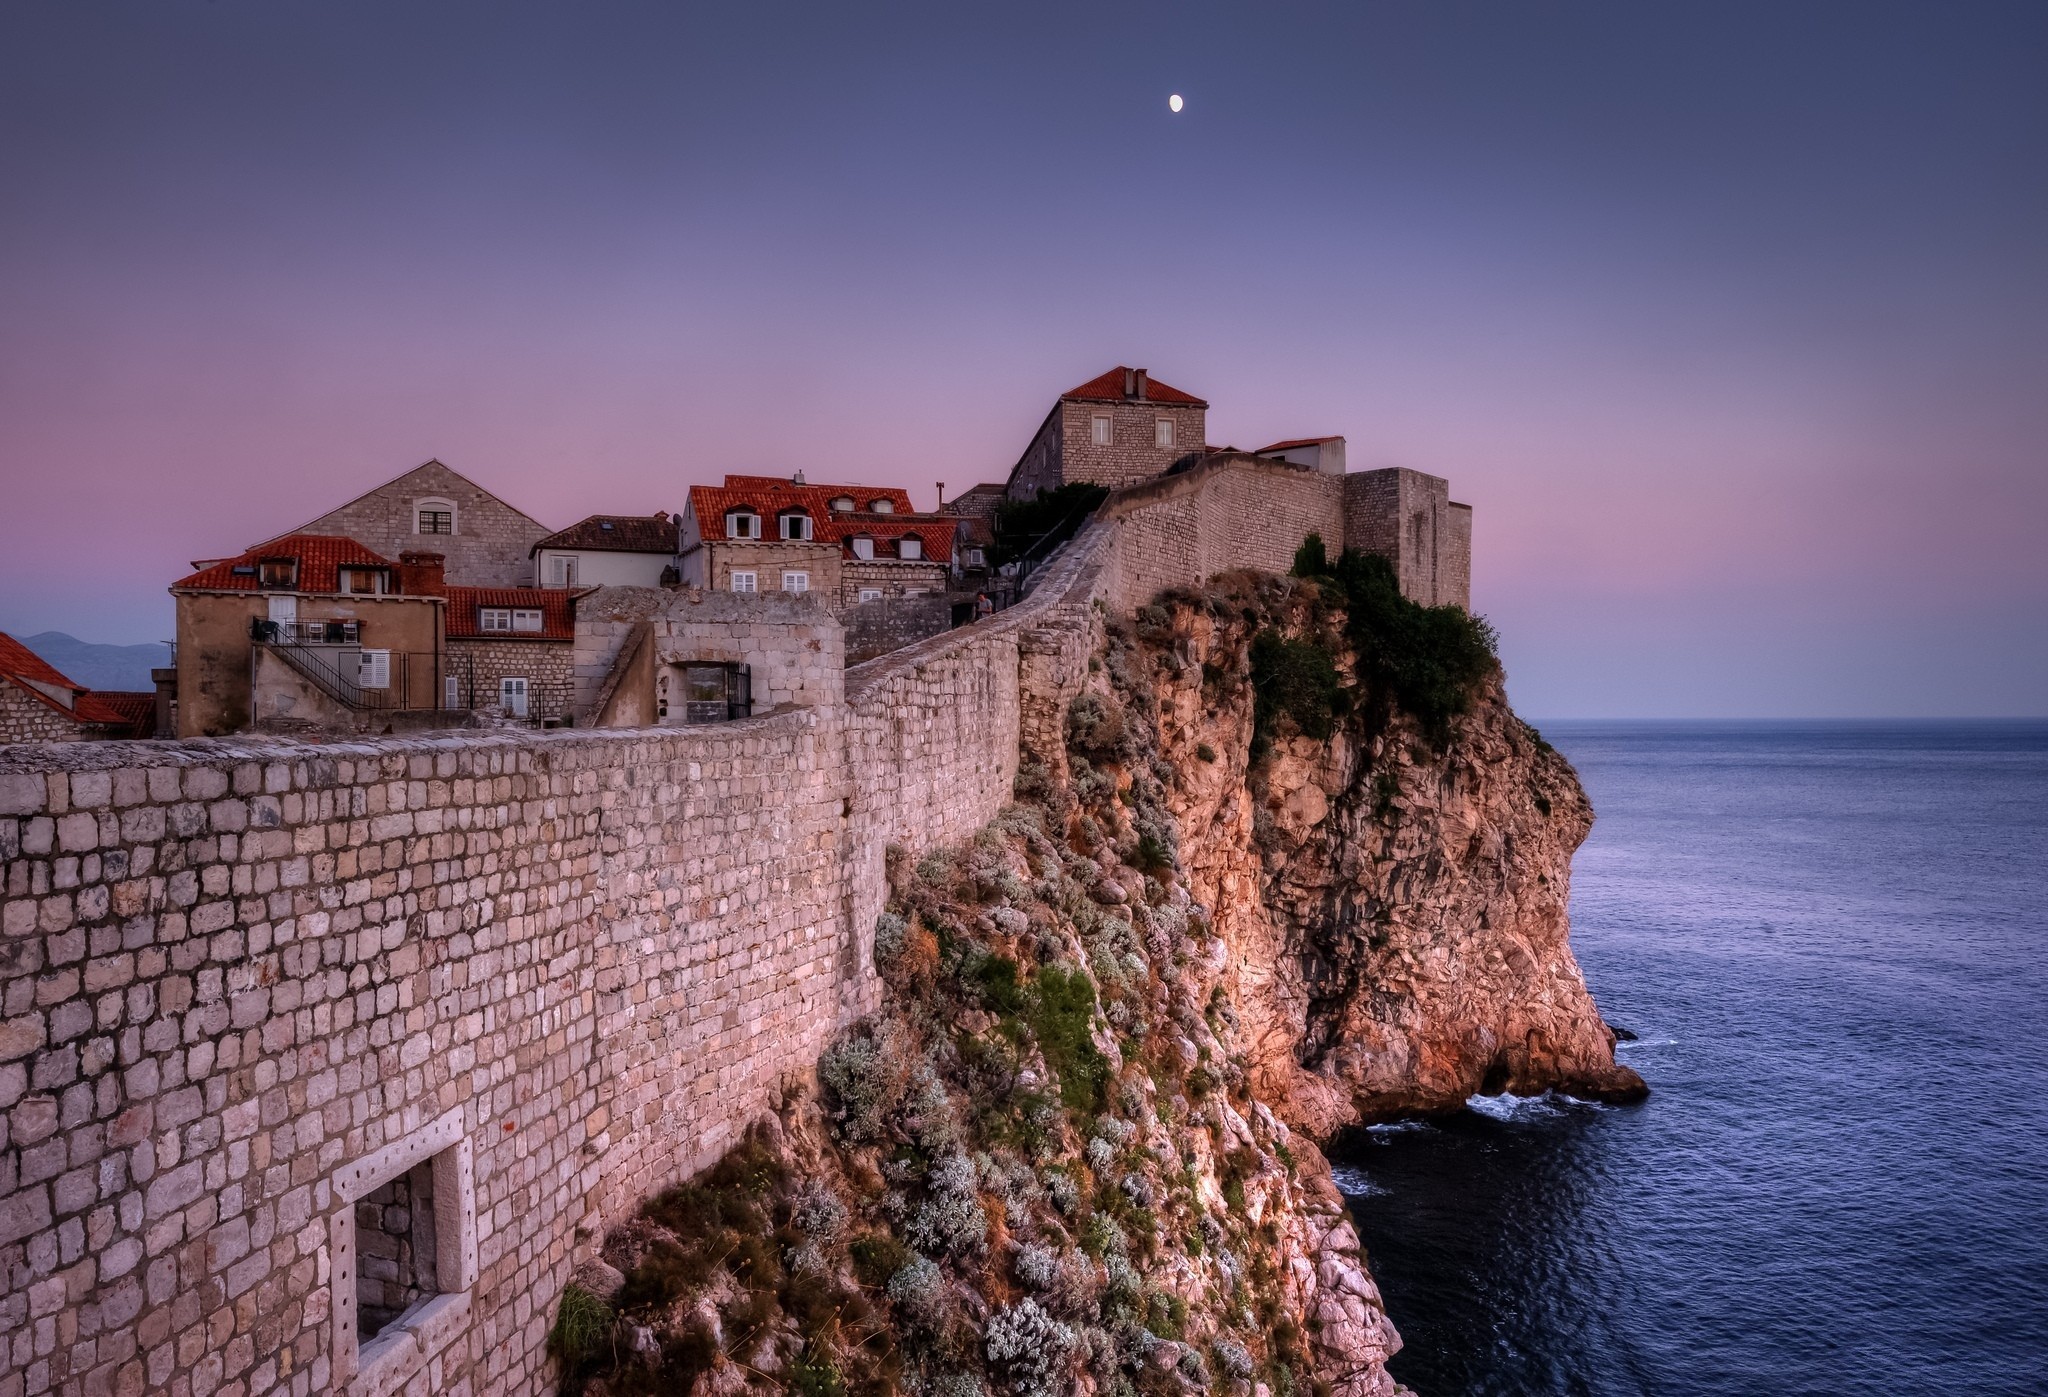 Architecture House Town Old Old Building Dubrovnik Evening Croatia Stone House Wall Sea Moon Horizon 2048x1397